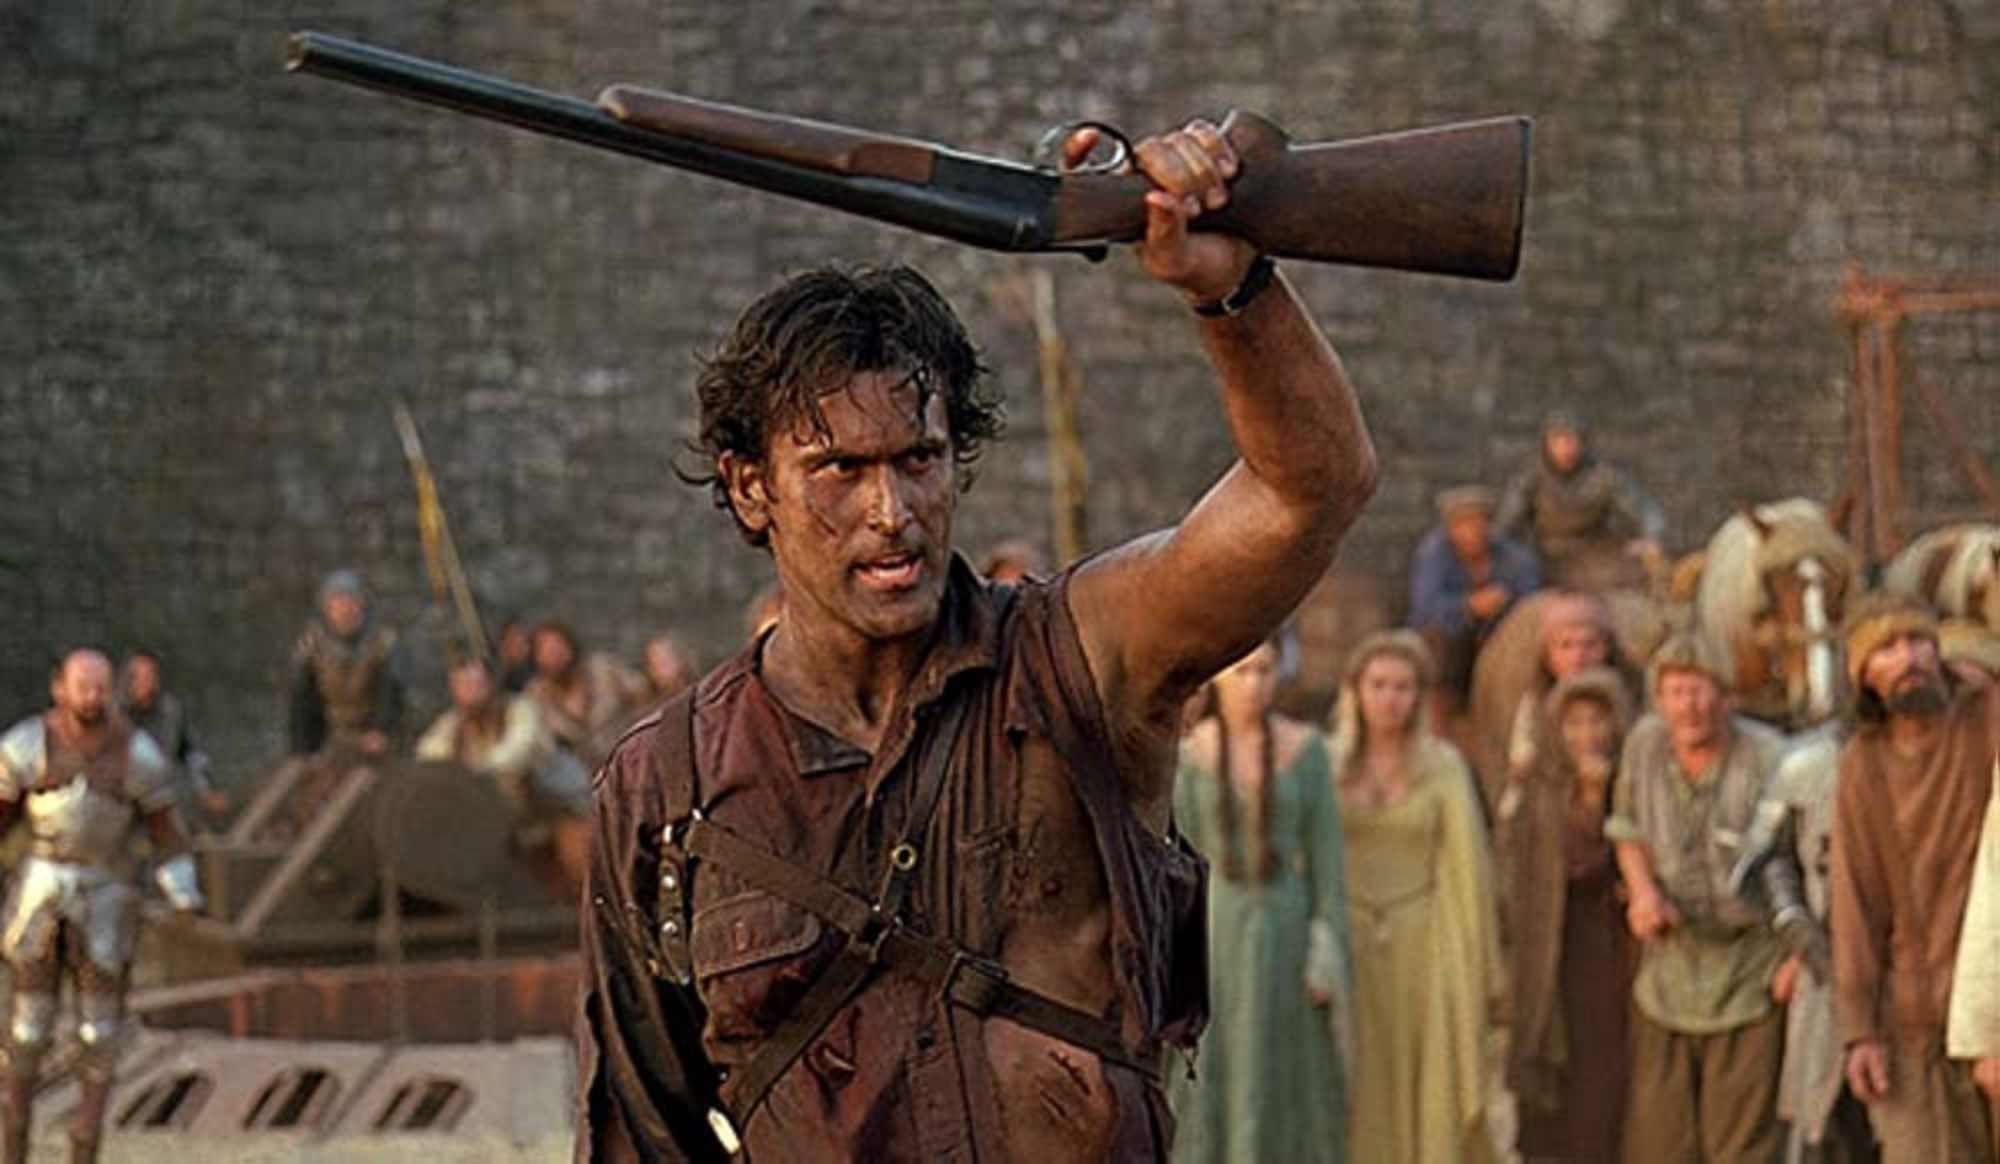 'Army of Darkness' Bruce Campbell as Ash Williams holding up his shotgun in a crowd of people.